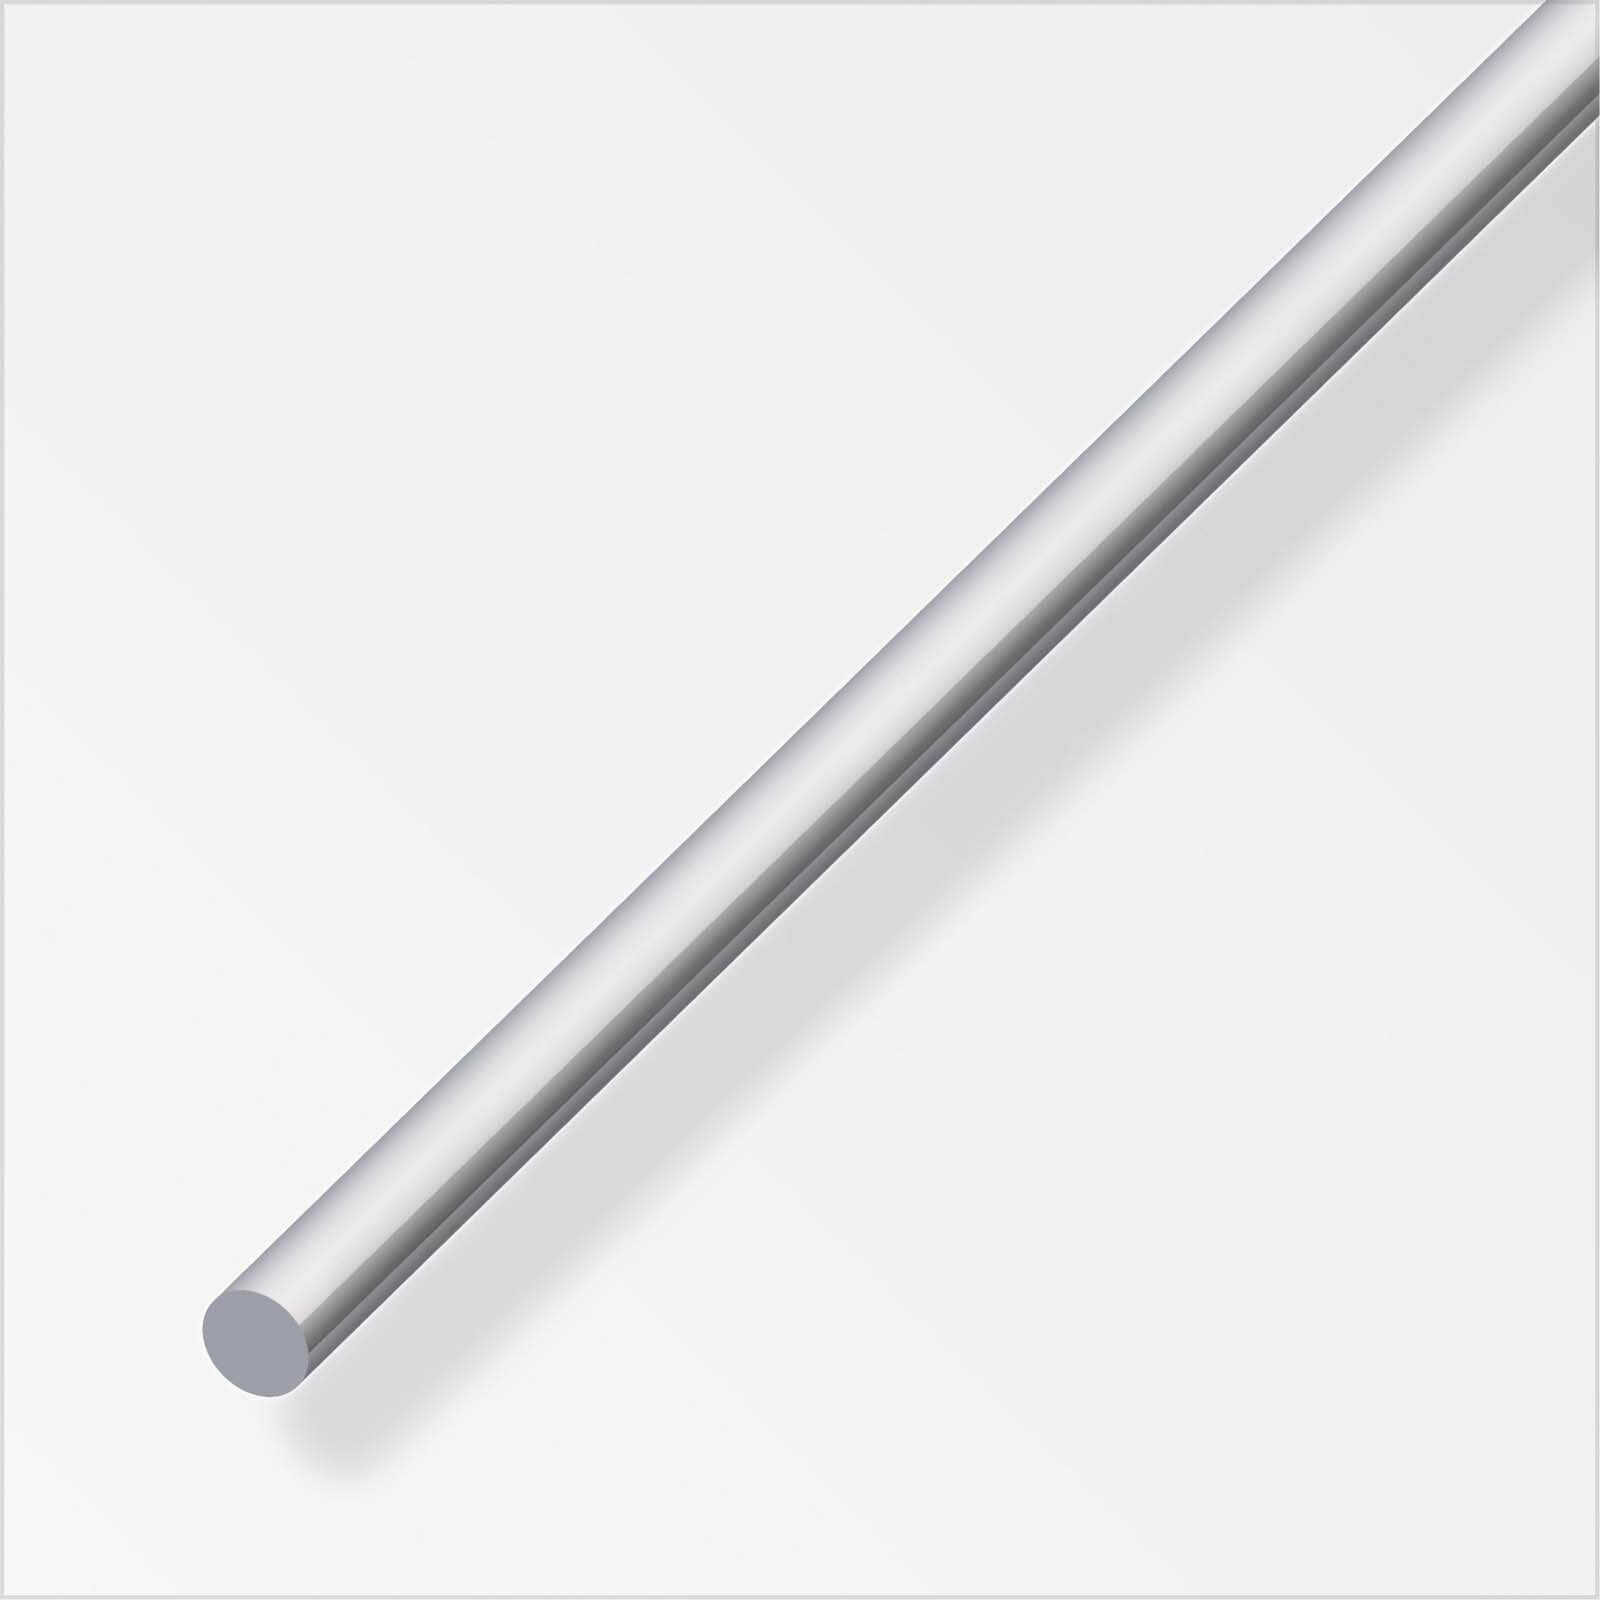 Photo of Stainless Steel Round Bar Profile - 6mm X 1m